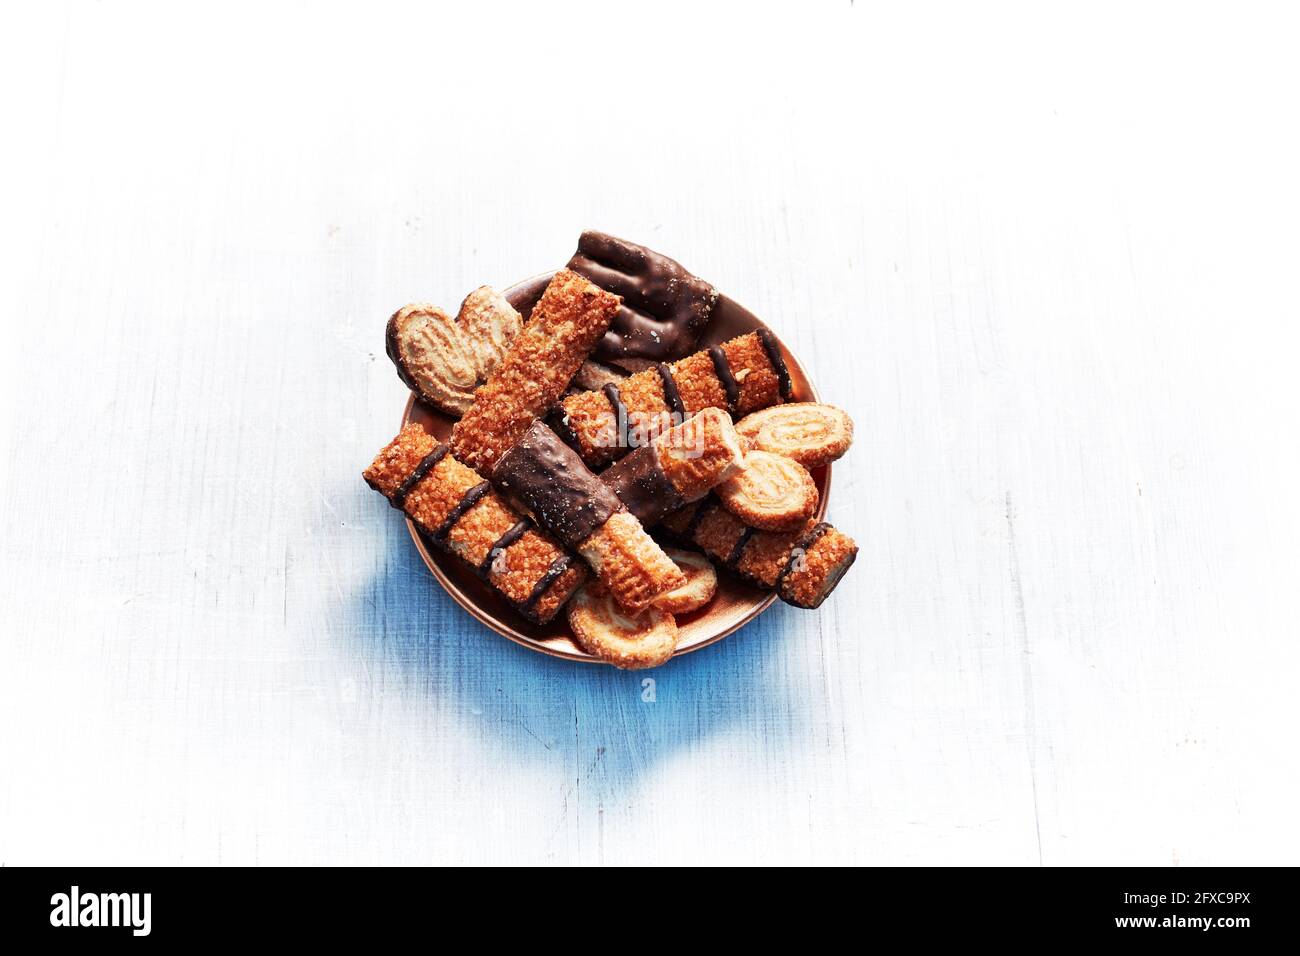 Plate of cookies with chocolate against white background Stock Photo